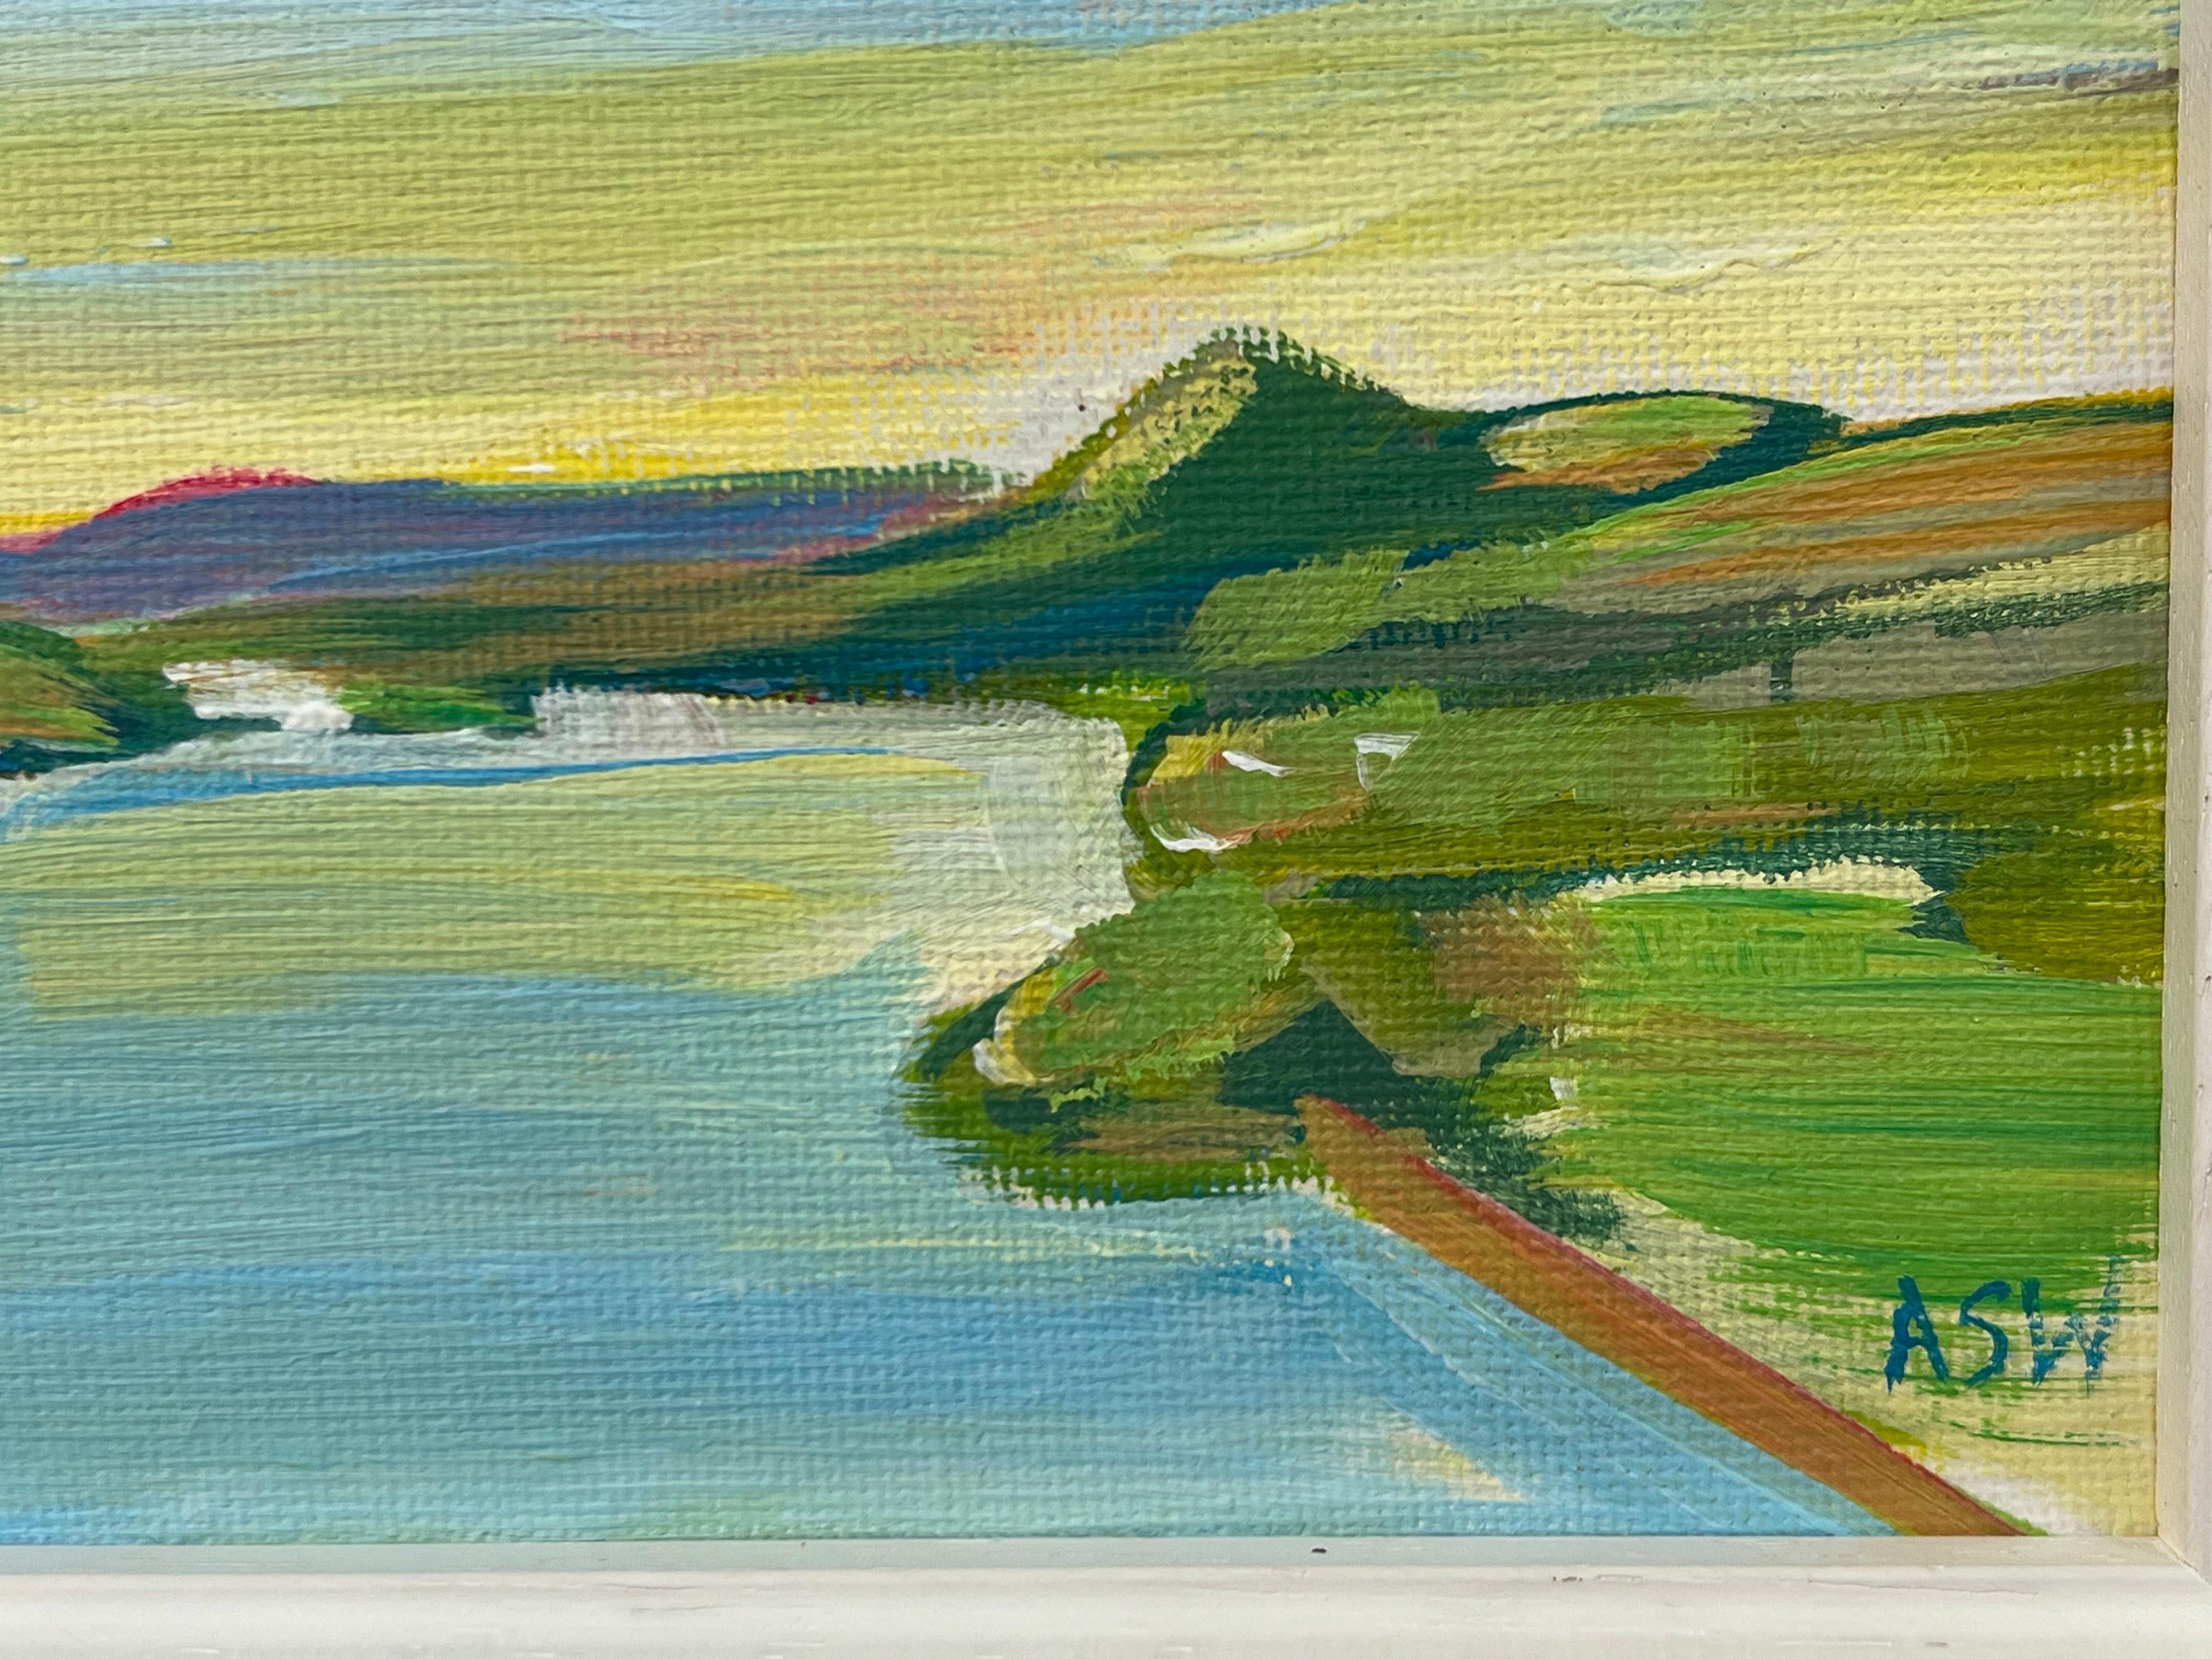 Miniature Painting Study of Hudson River, New York State, USA by British Artist For Sale 5